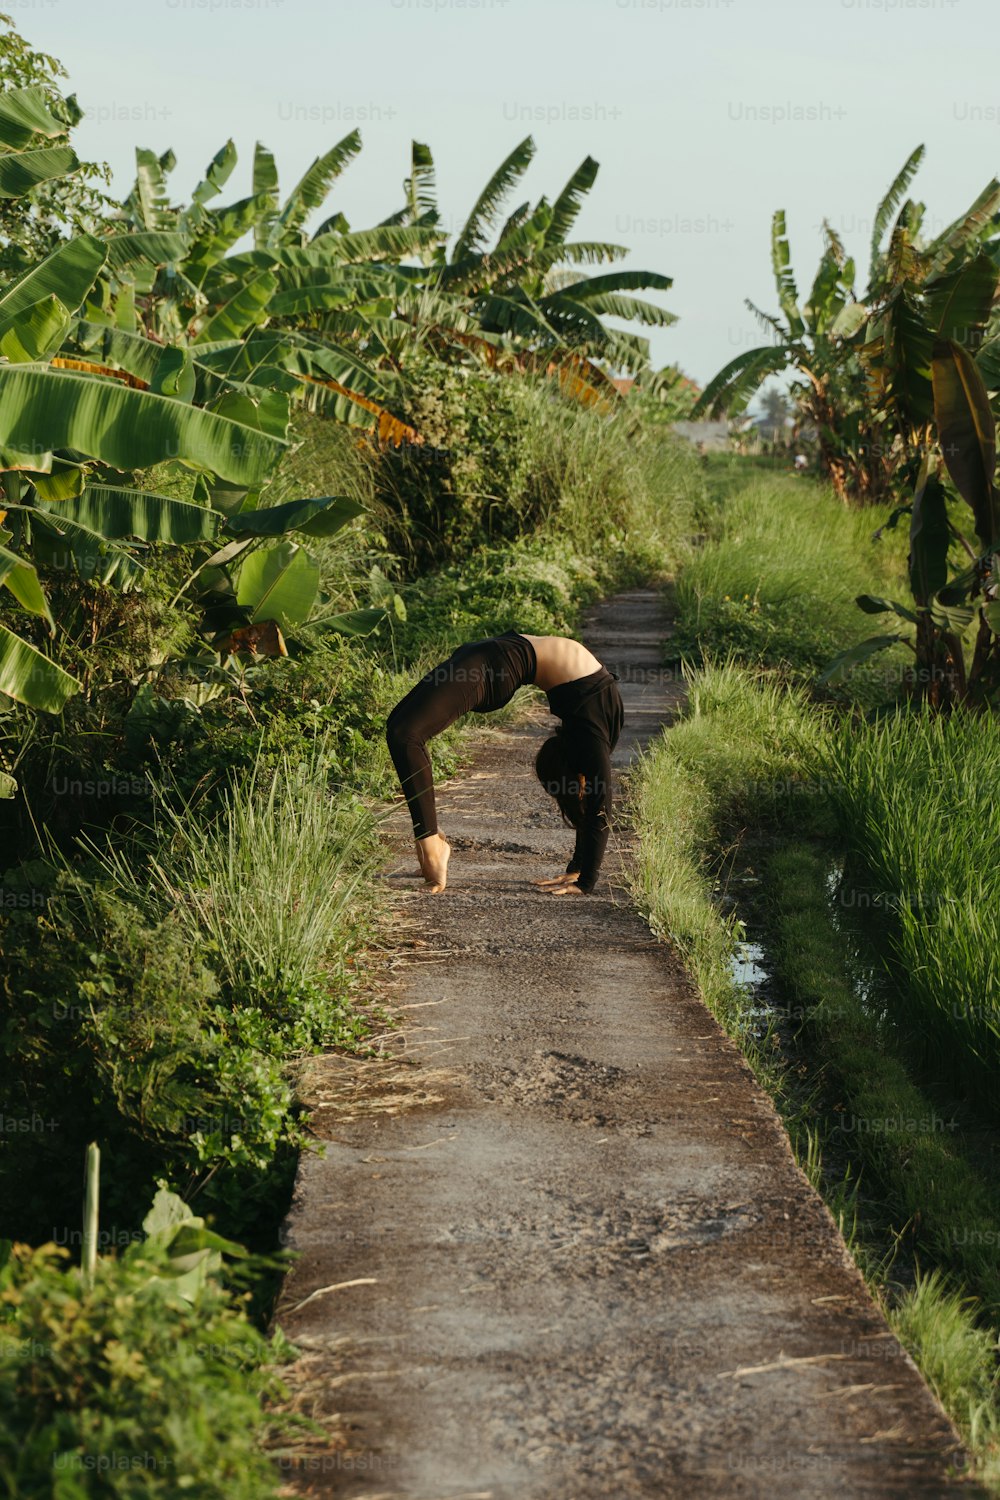 a person doing a handstand on a dirt road